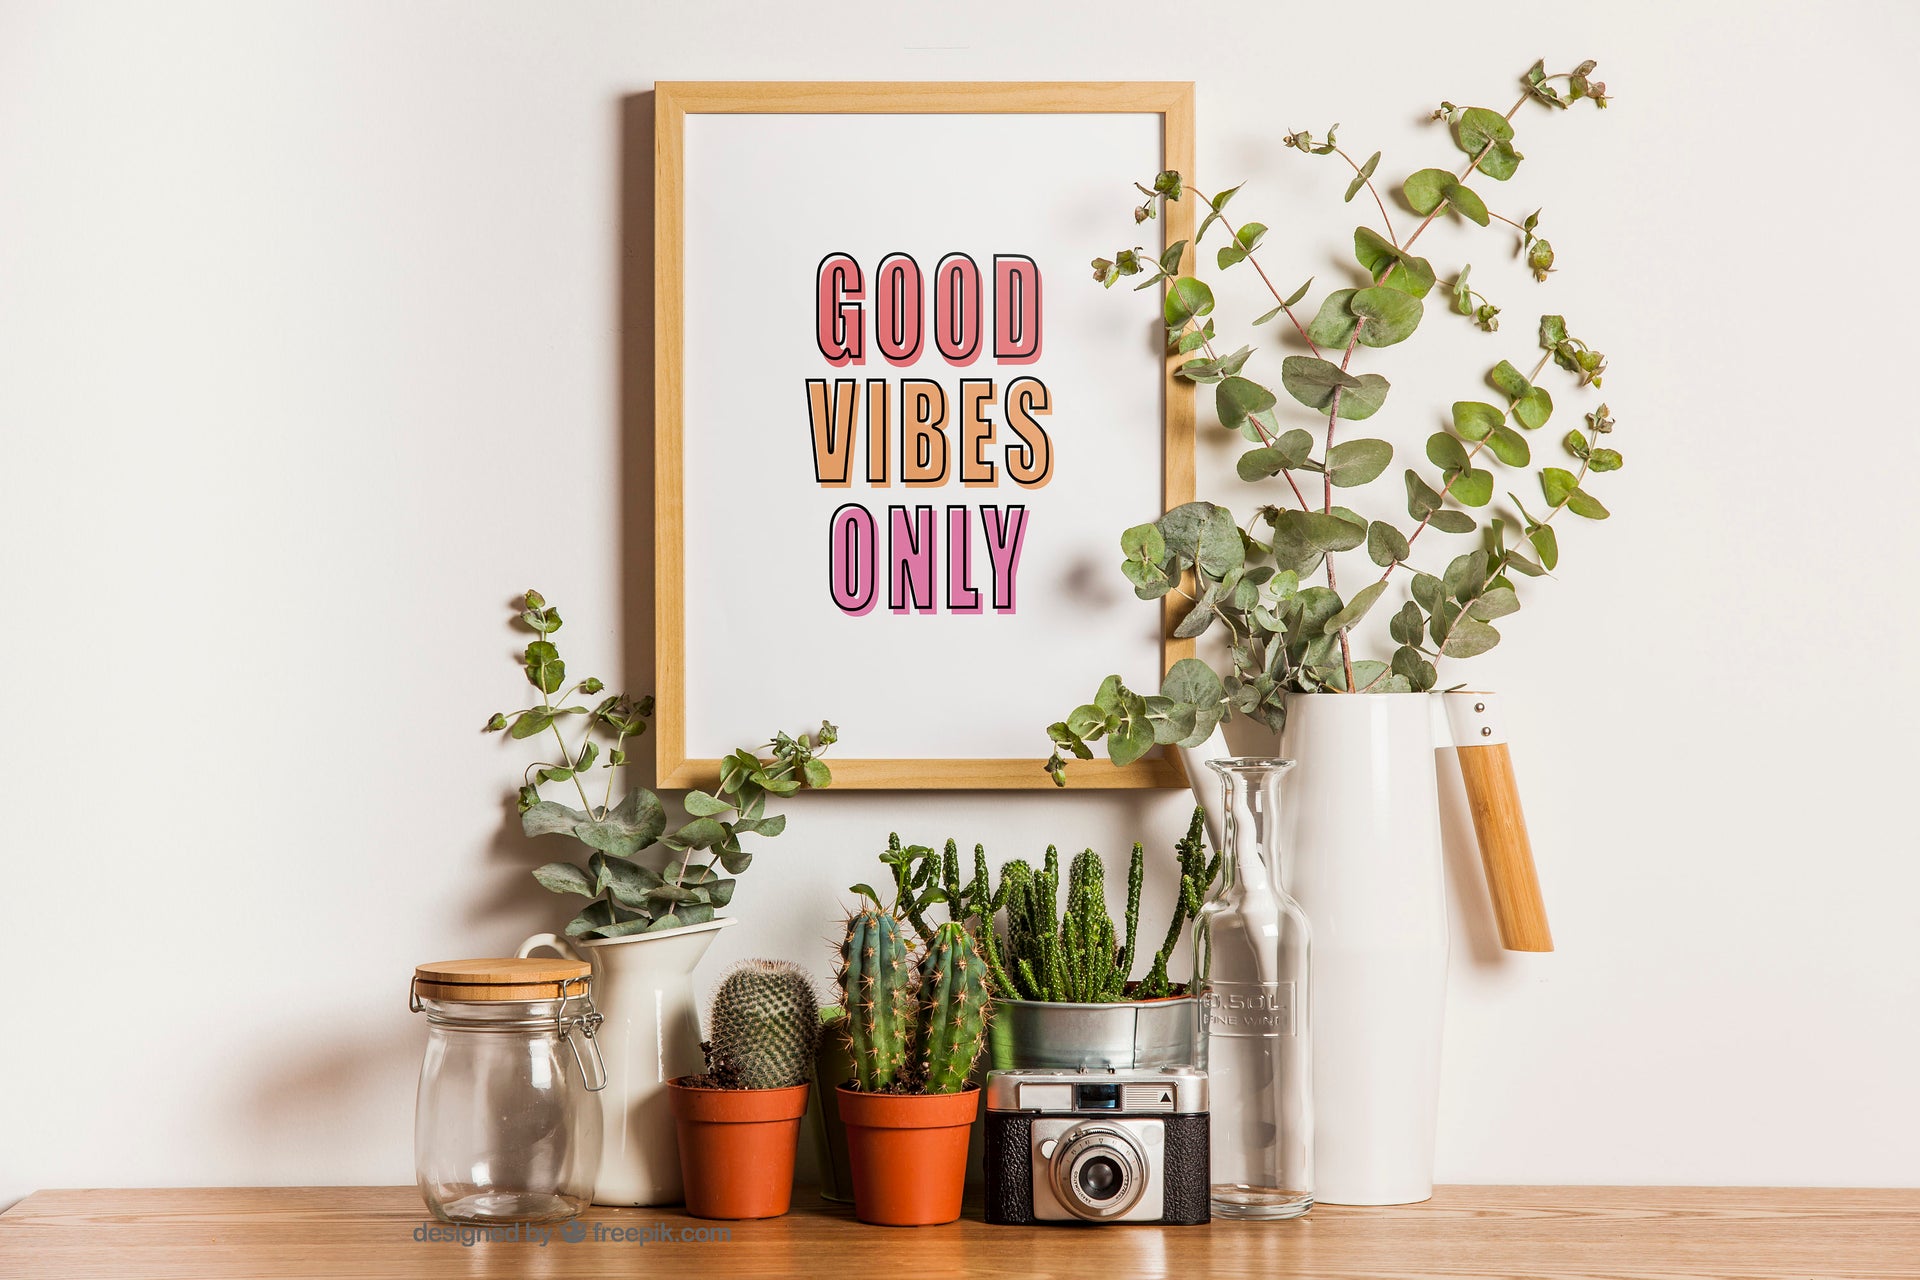 Good Vibes Only Framed Print by Gert & Co with Plants